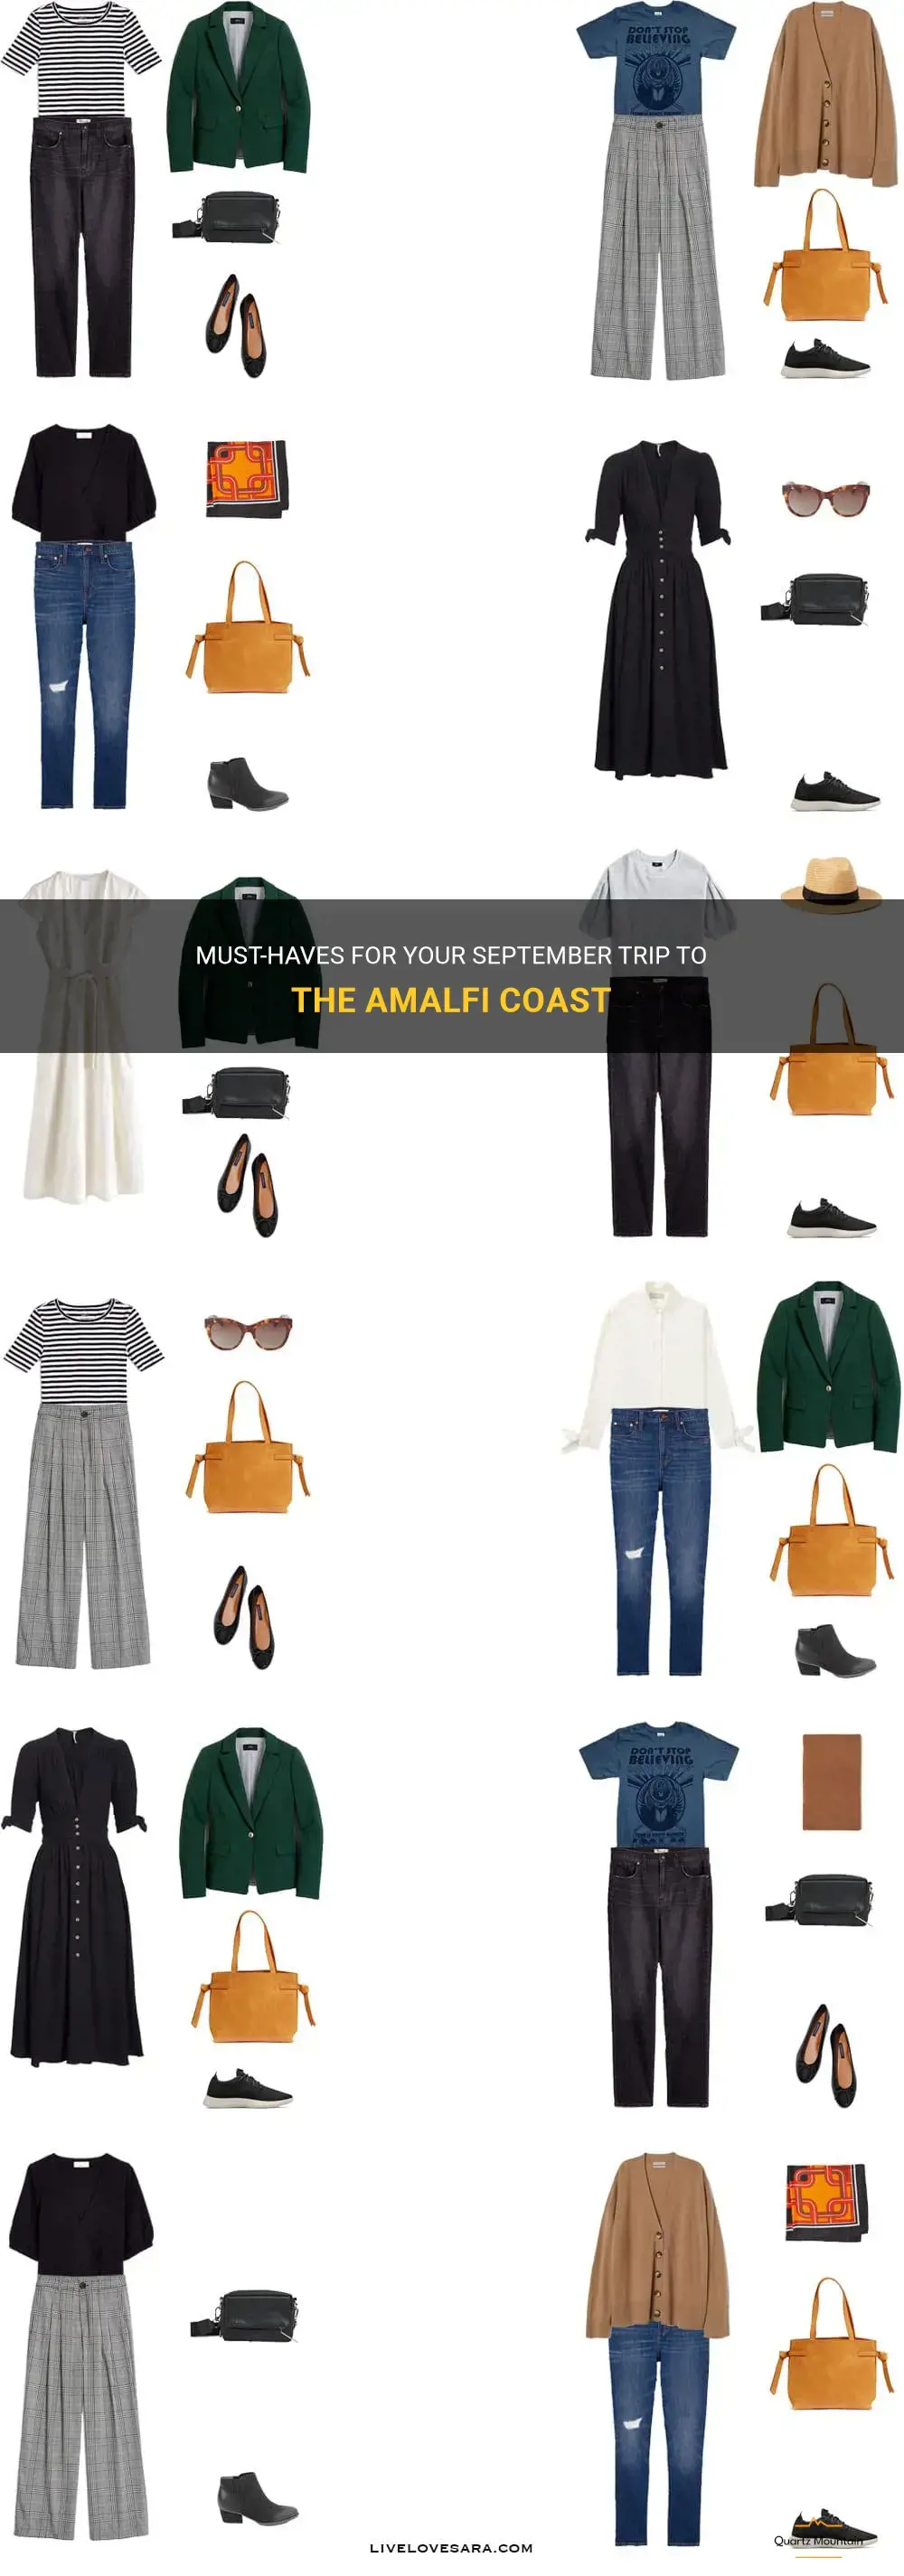 what to pack for september trip to amalfi coast